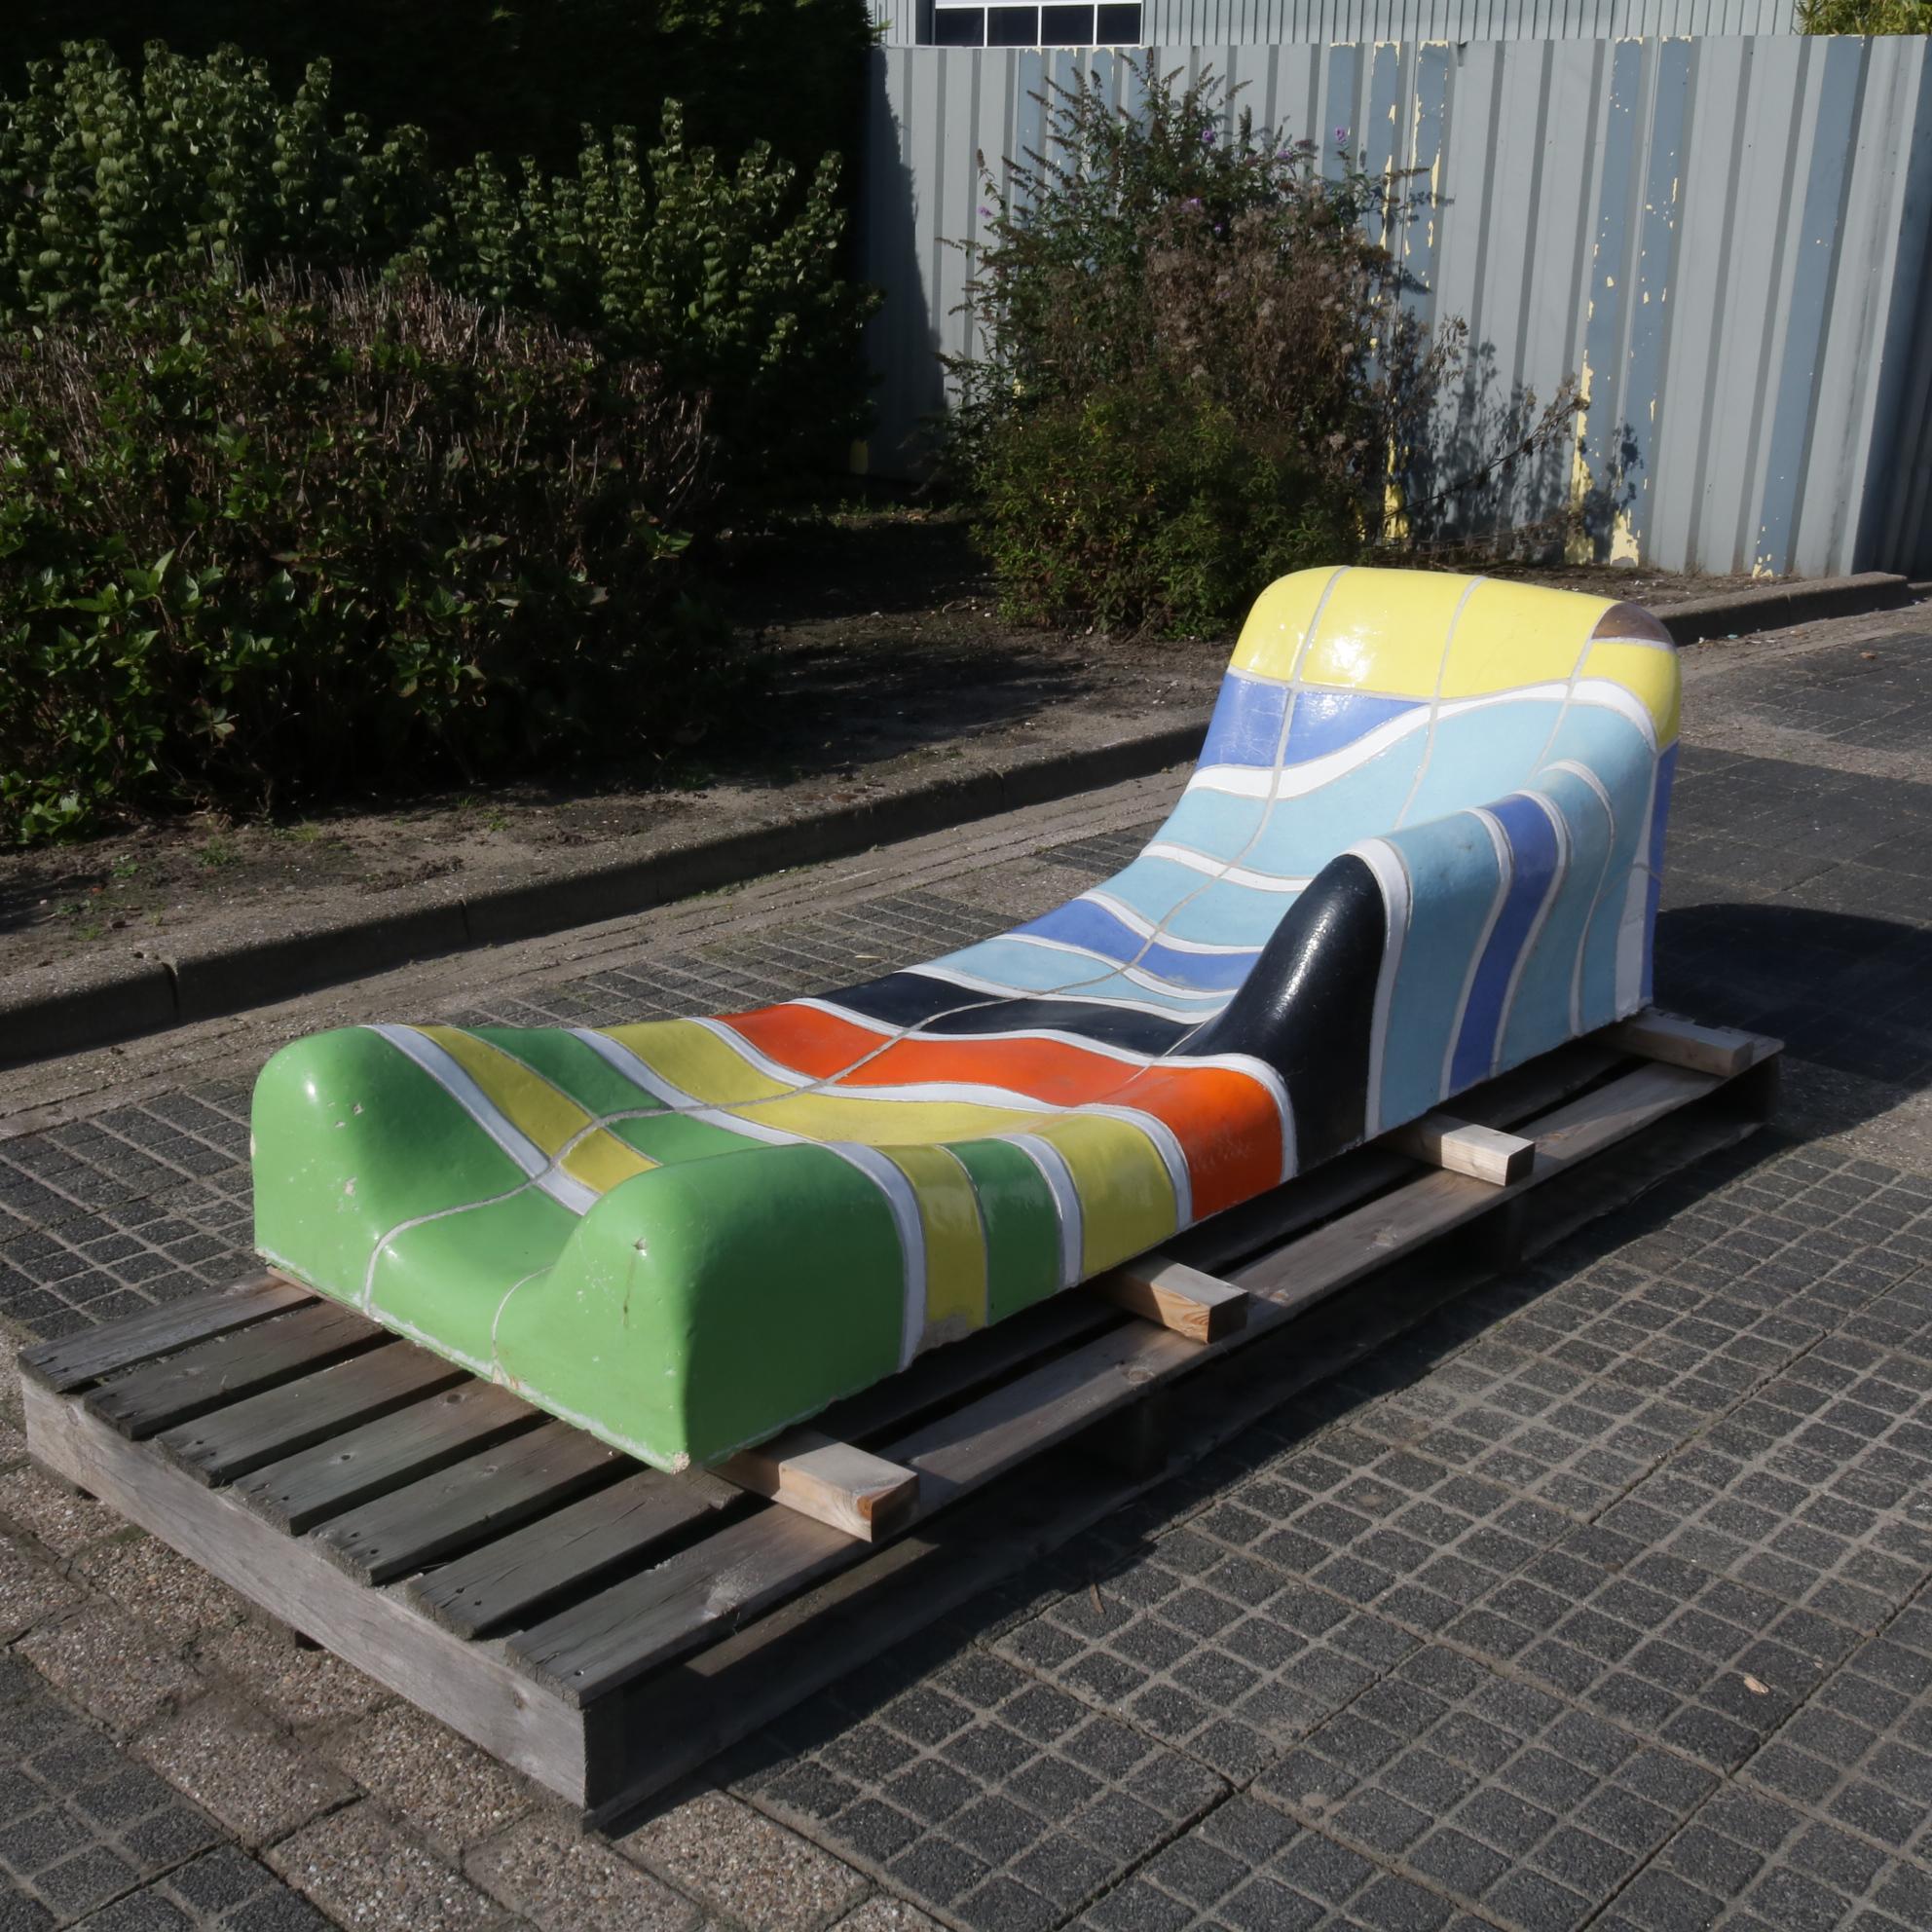 20th Century Jan Snoeck Ceramics Daybed or Sculpture from the Ms Volendam, Netherlands 1991